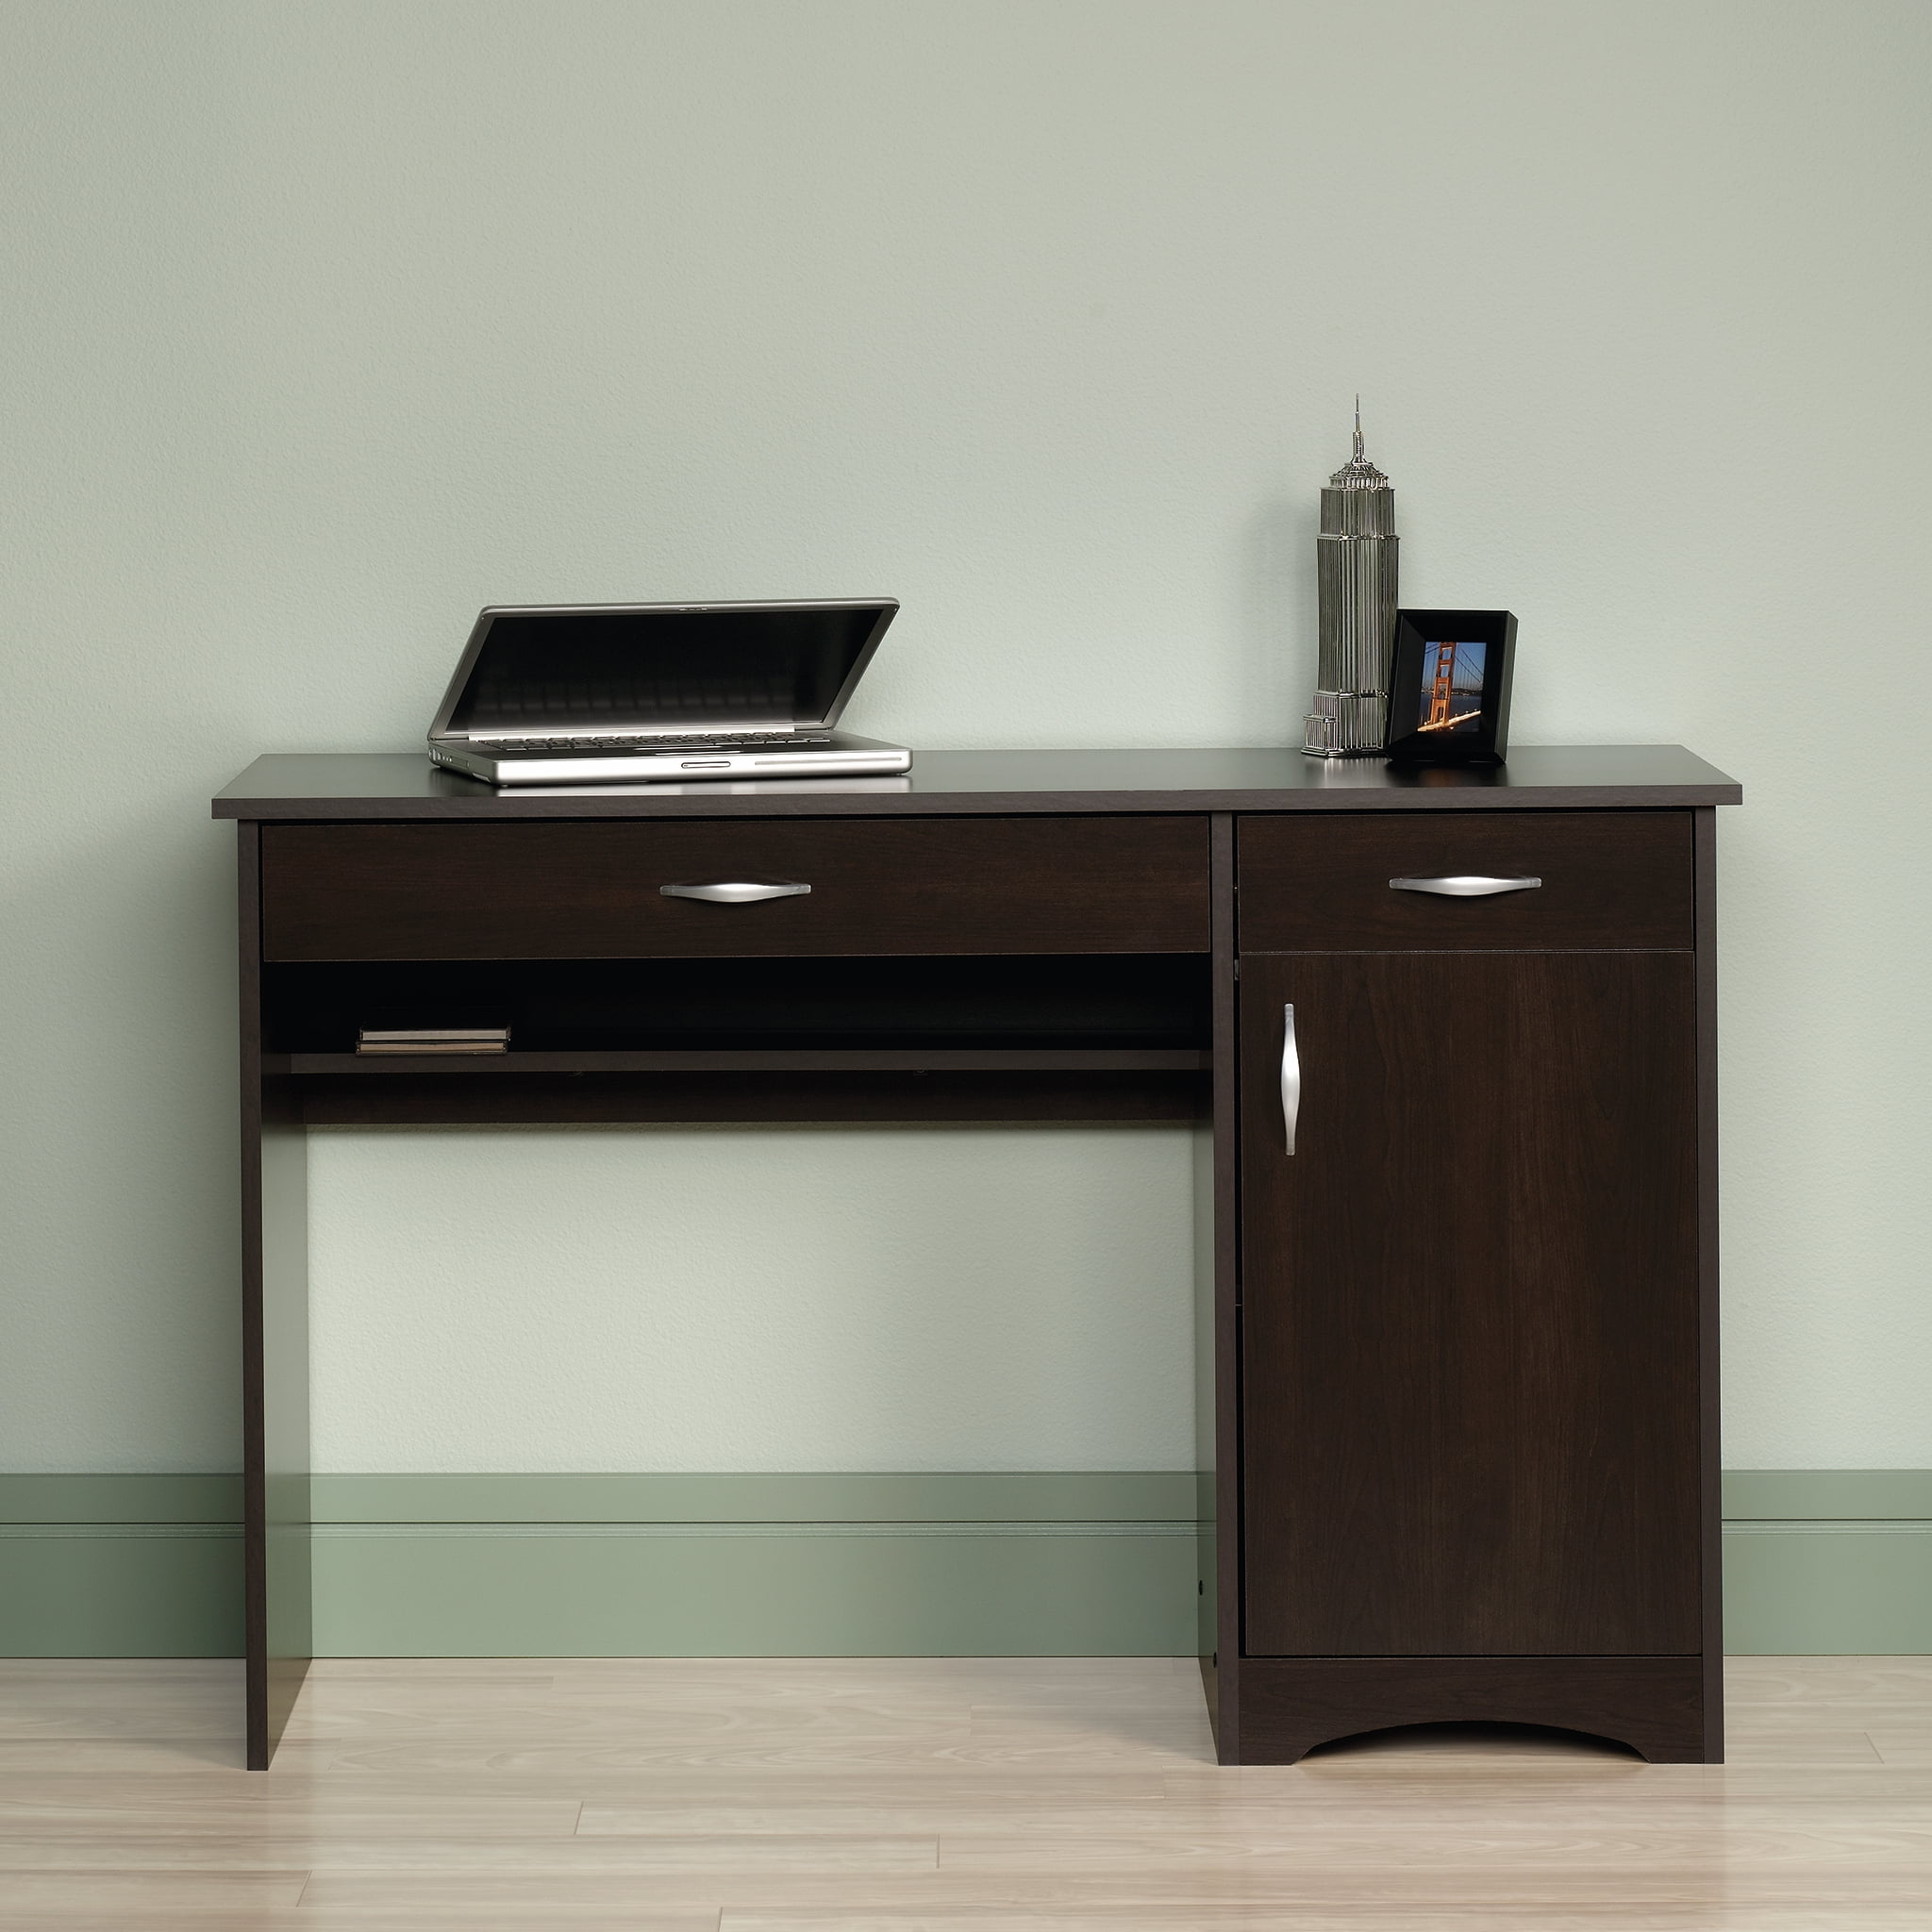 Mainstays Student Desk With Easy-glide Drawer White Finish for sale online 